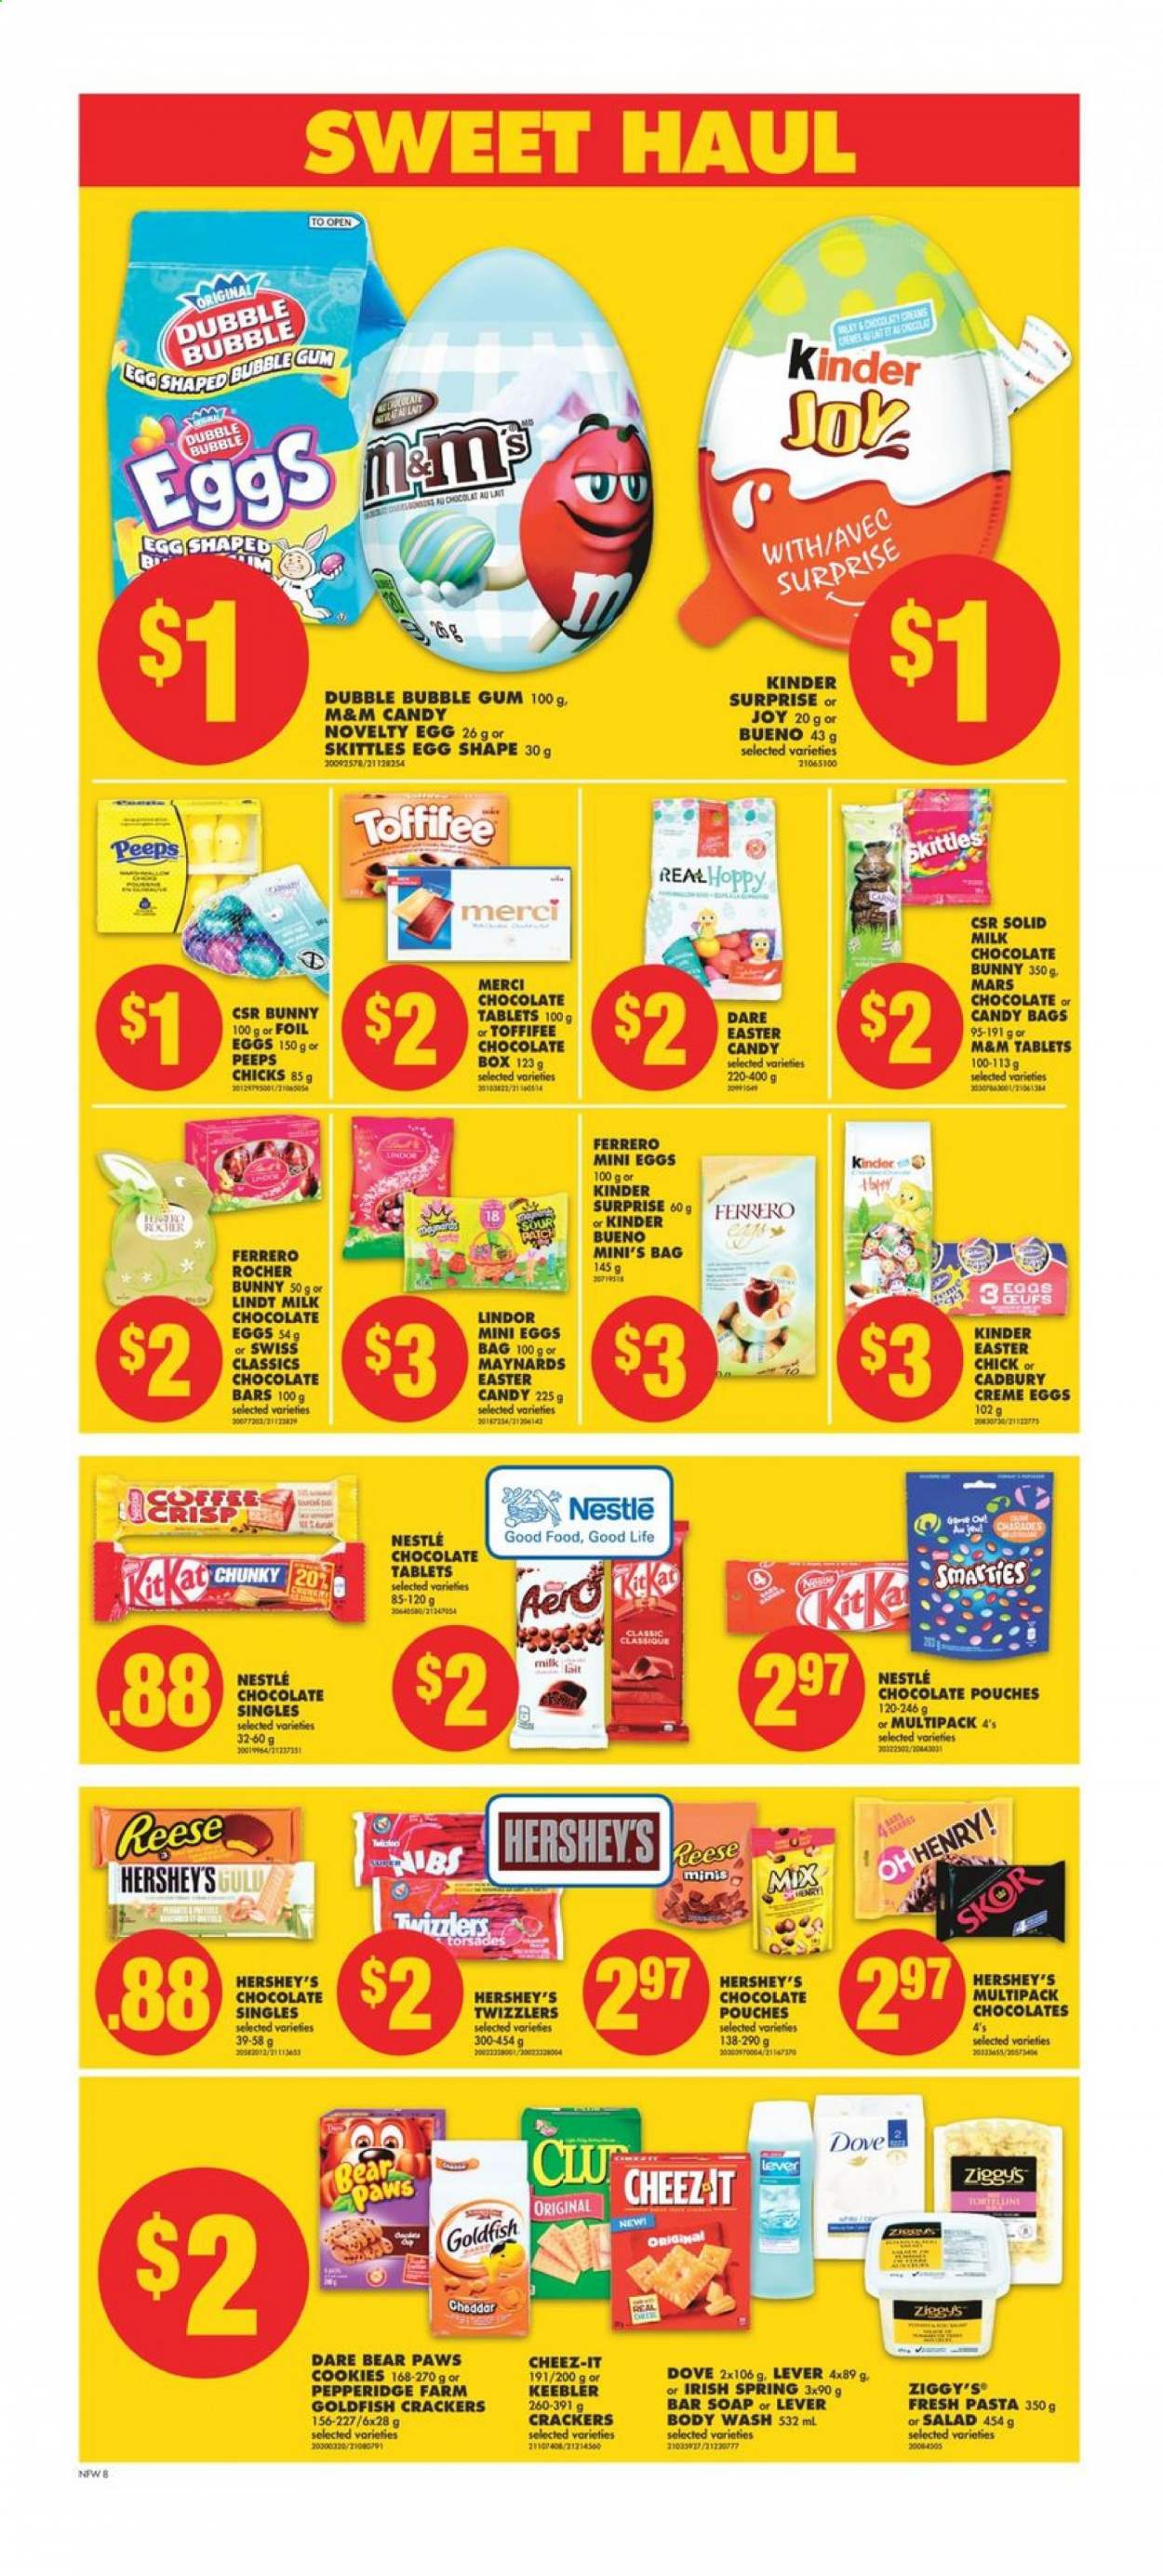 thumbnail - No Frills Flyer - February 26, 2021 - March 04, 2021 - Sales products - cheese, Hershey's, cookies, milk chocolate, Kinder Surprise, Mars, bubblegum, crackers, Kinder Bueno, Ego, Cadbury, Merci, Skittles, chocolate egg, chocolate bunny, Keebler, Peeps, chocolate bar, Goldfish, Cheez-It, Good Life, coffee, Joy, body wash, soap bar, soap, Paws, Nestlé, M&M's. Page 8.